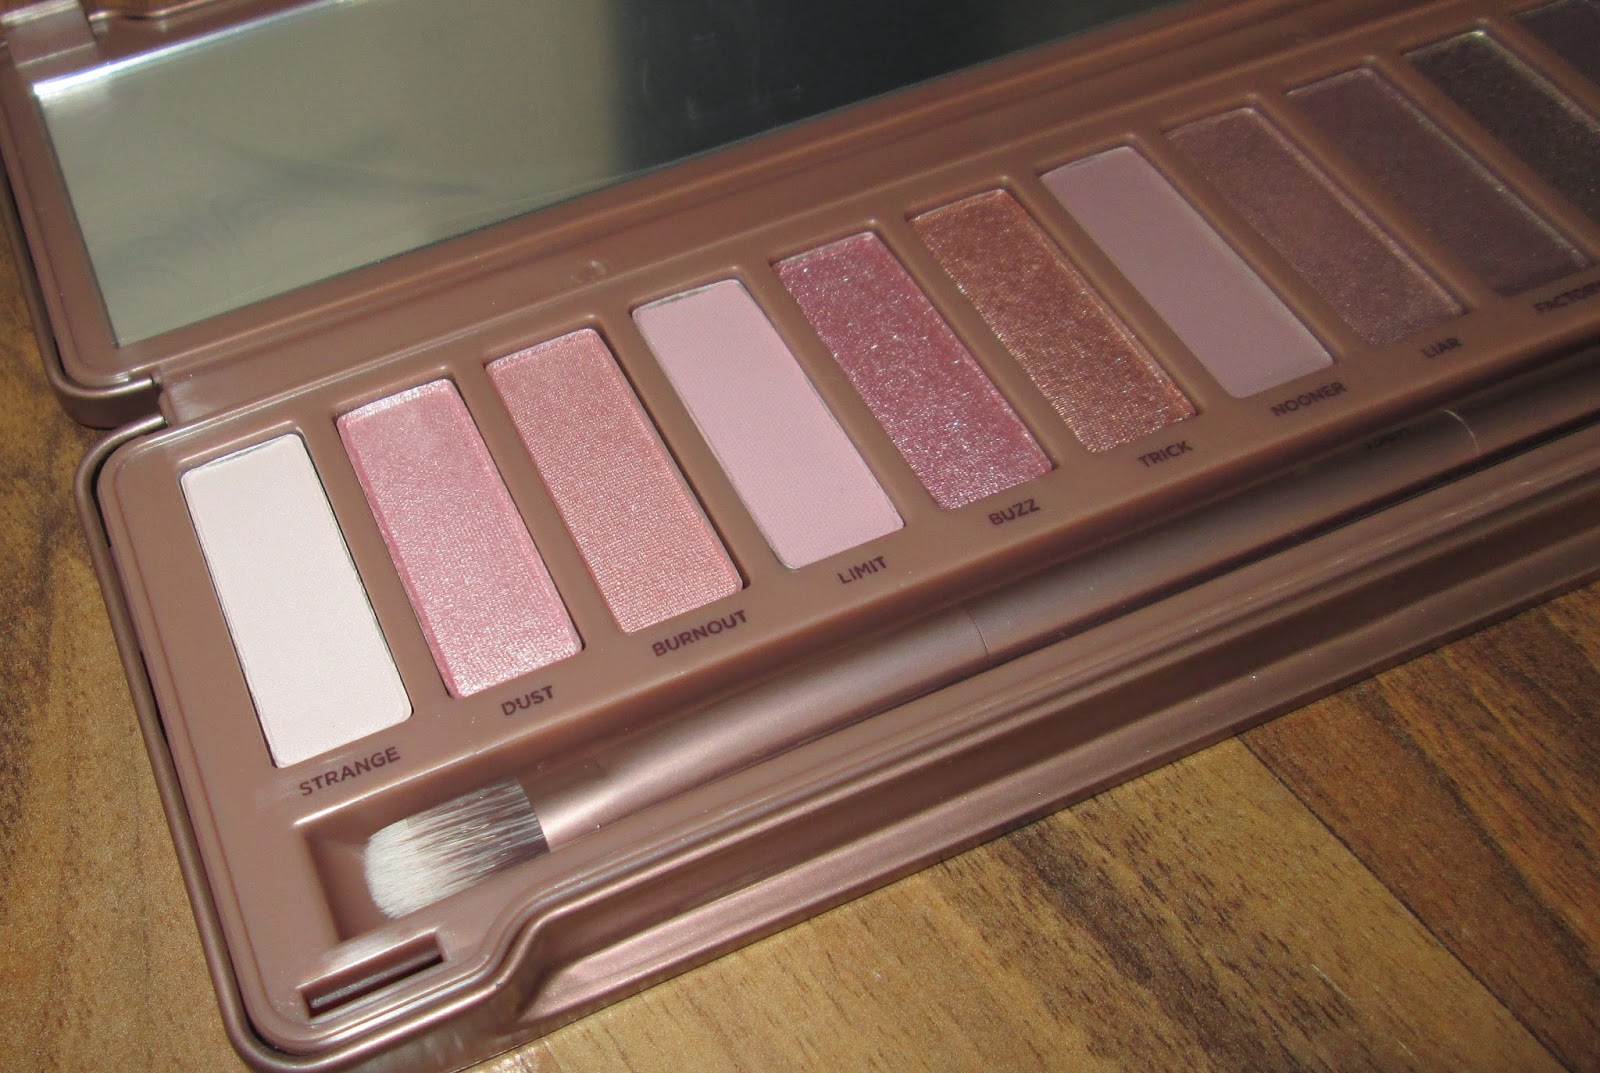 In Review: The Urban Decay Naked 3 Palette - Lela London